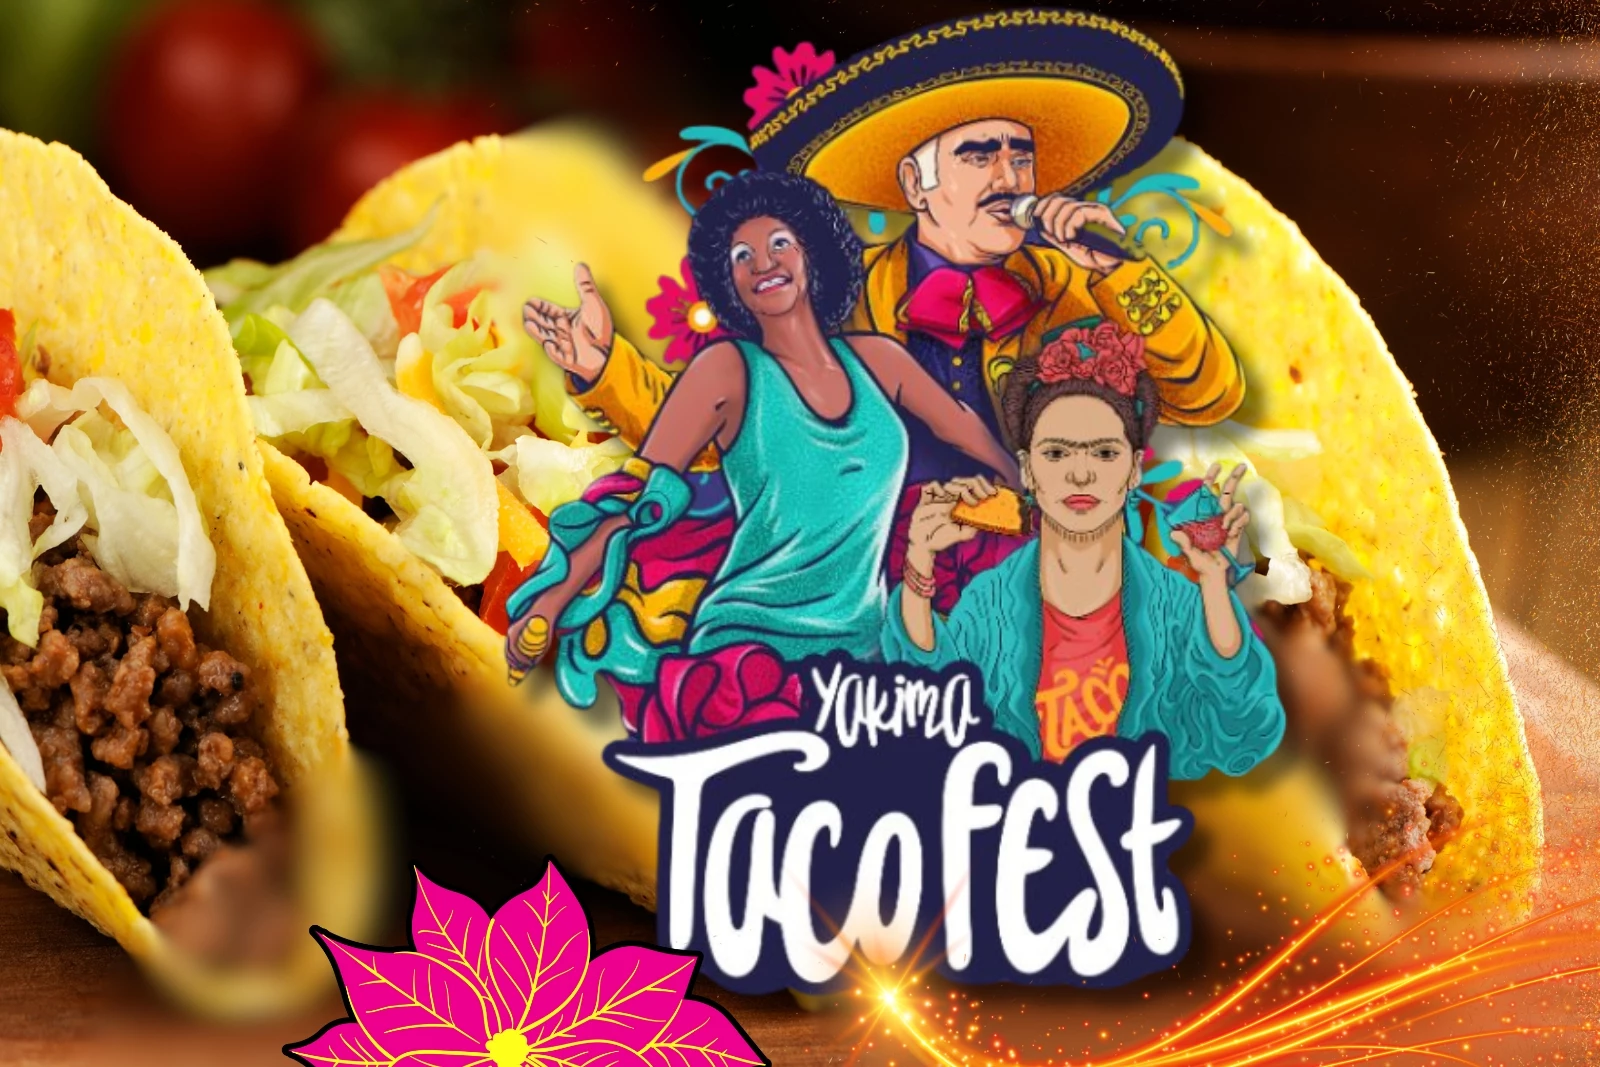 Enter to Win Some Coveted Tickets to Yakima Taco Fest